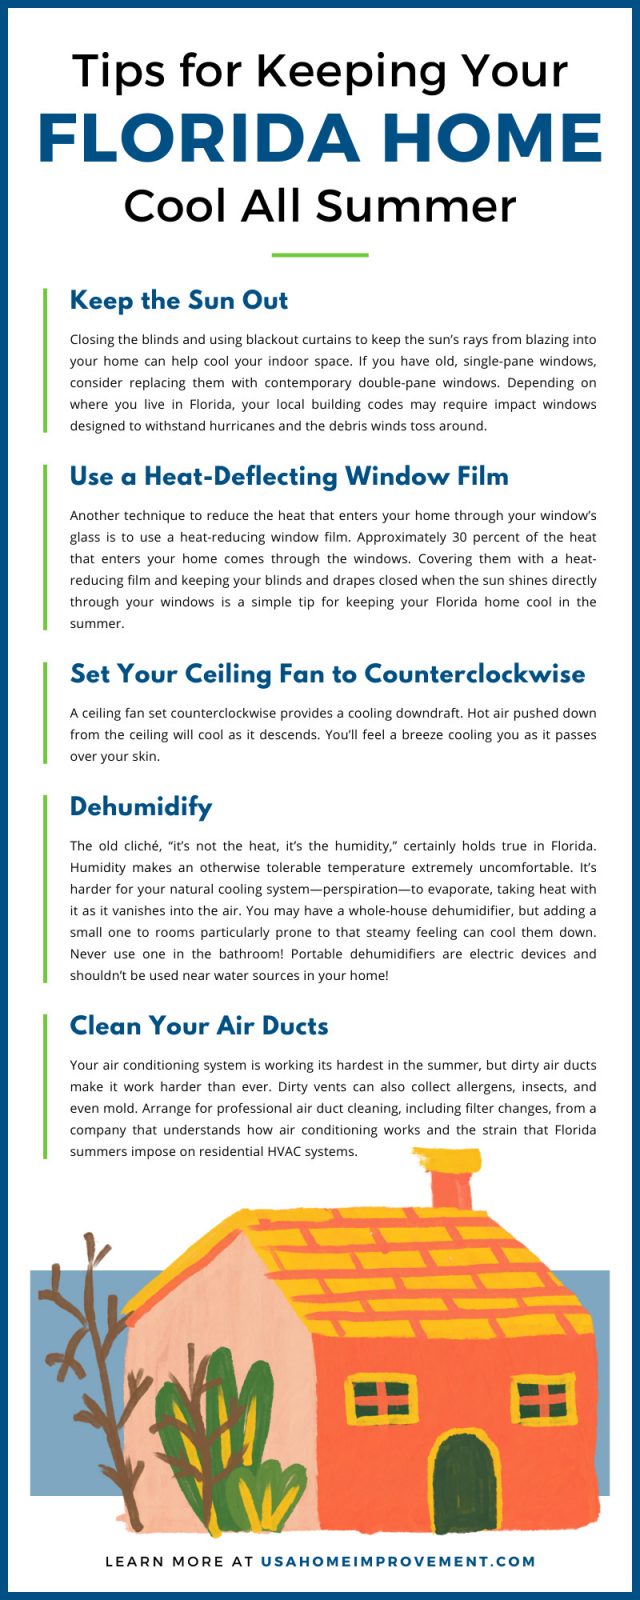 Tips for Keeping Your Florida Home Cool All Summer